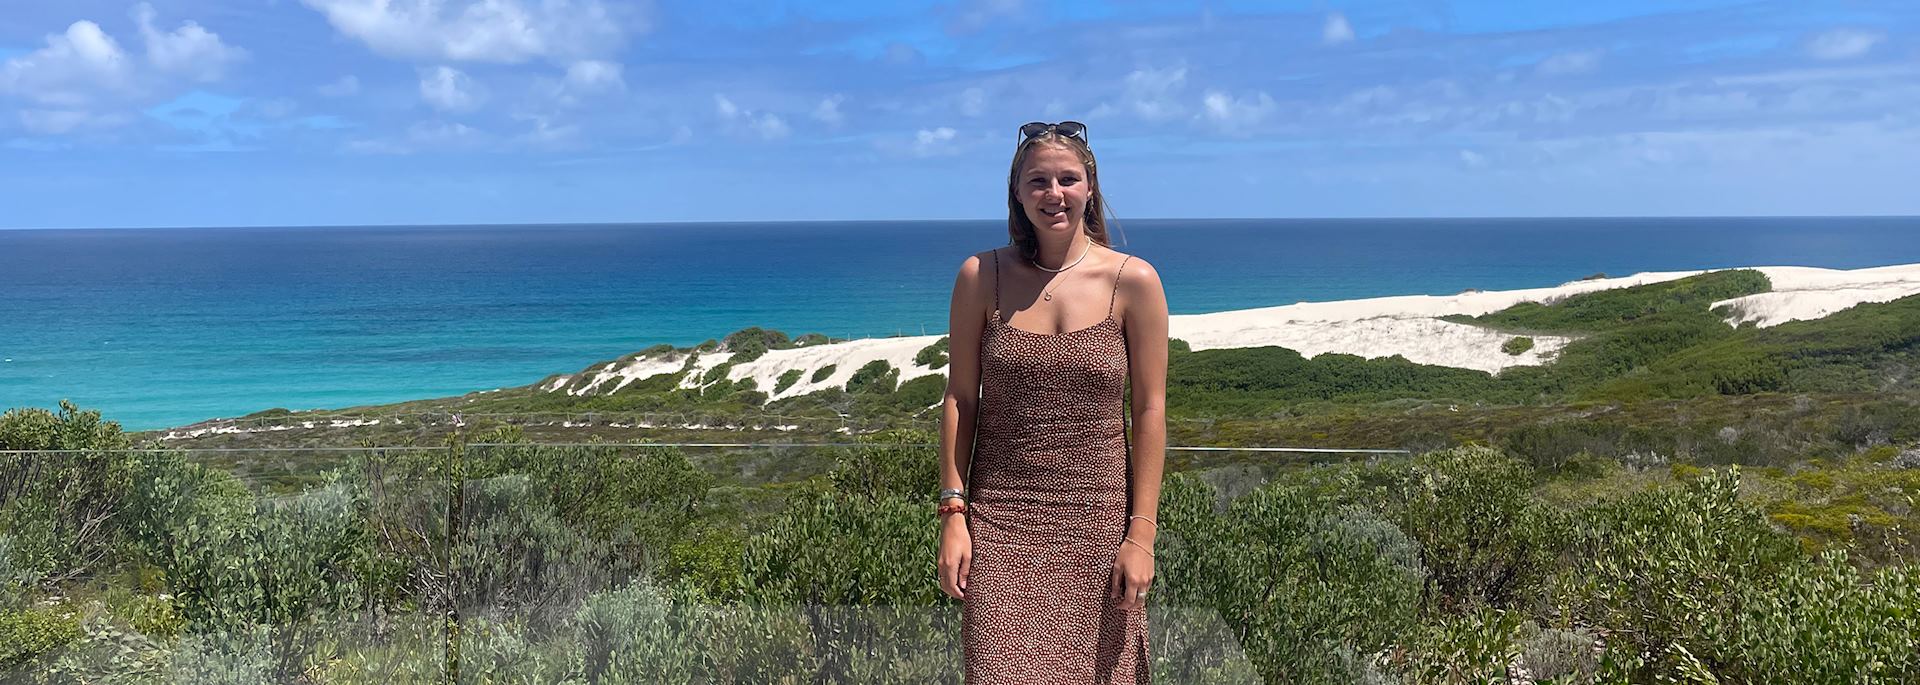 Cassie at the De Hoop Nature Reserve, South Africa